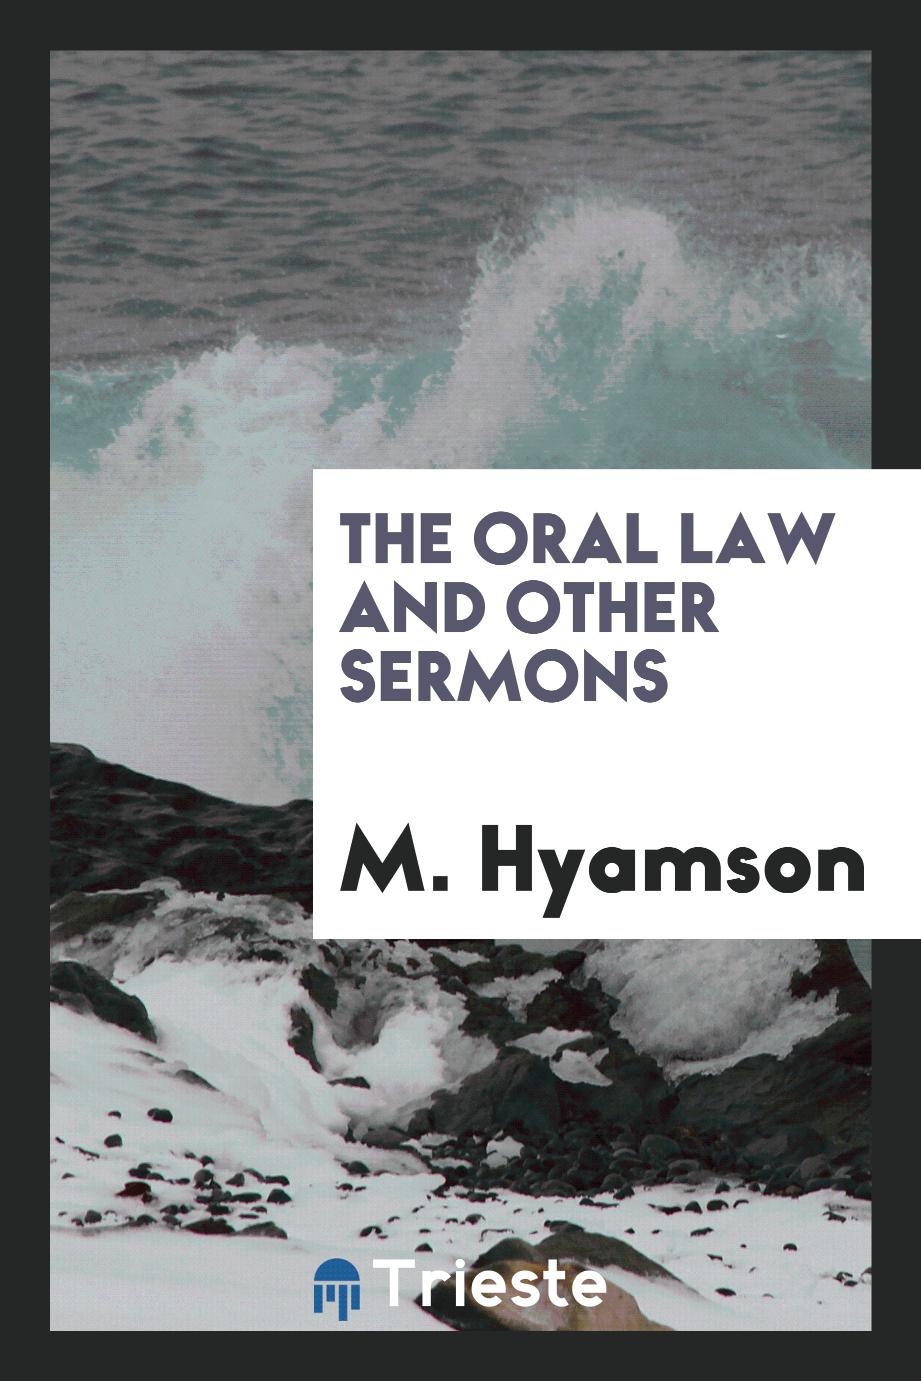 The oral law and other sermons